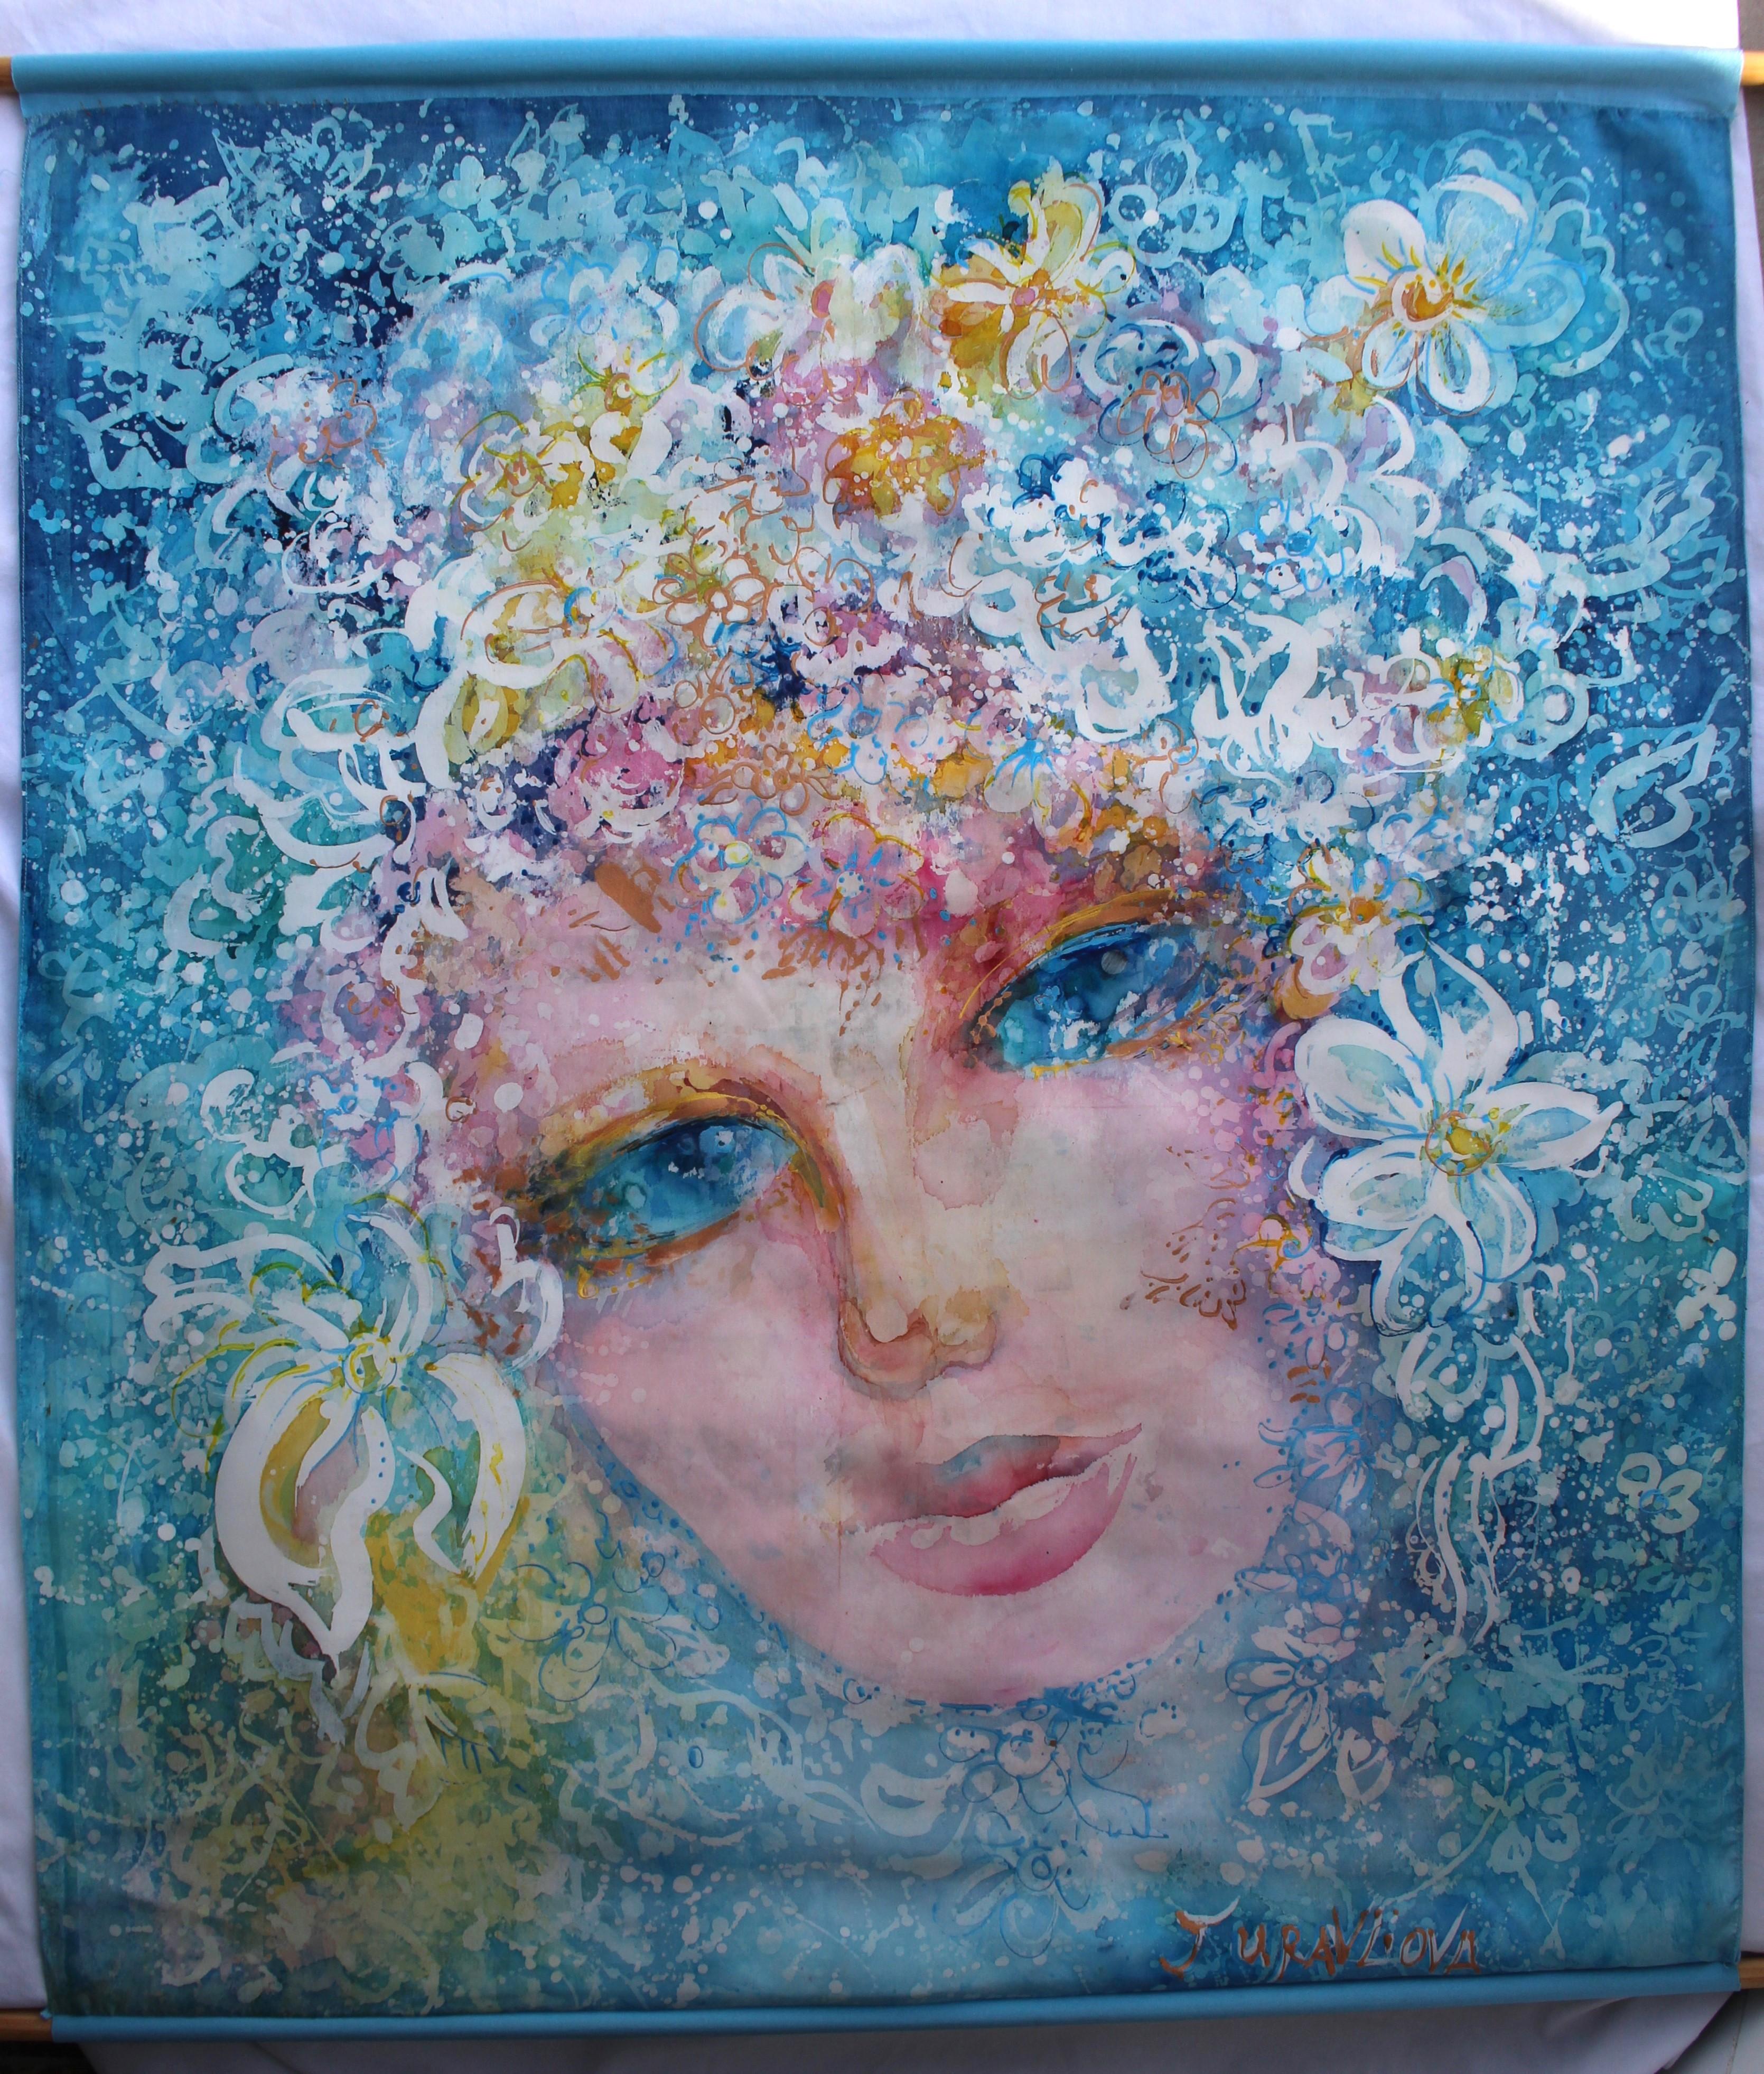 Mixed media on silent on fabric

Liubov Juravliova is a French painter born in Chisinau, Moldova in 1963 who lives and works in Argenteuil, near Paris, France She has been listed at Drouot since 2009, and was elected as Meilleurs Ouvriers de France